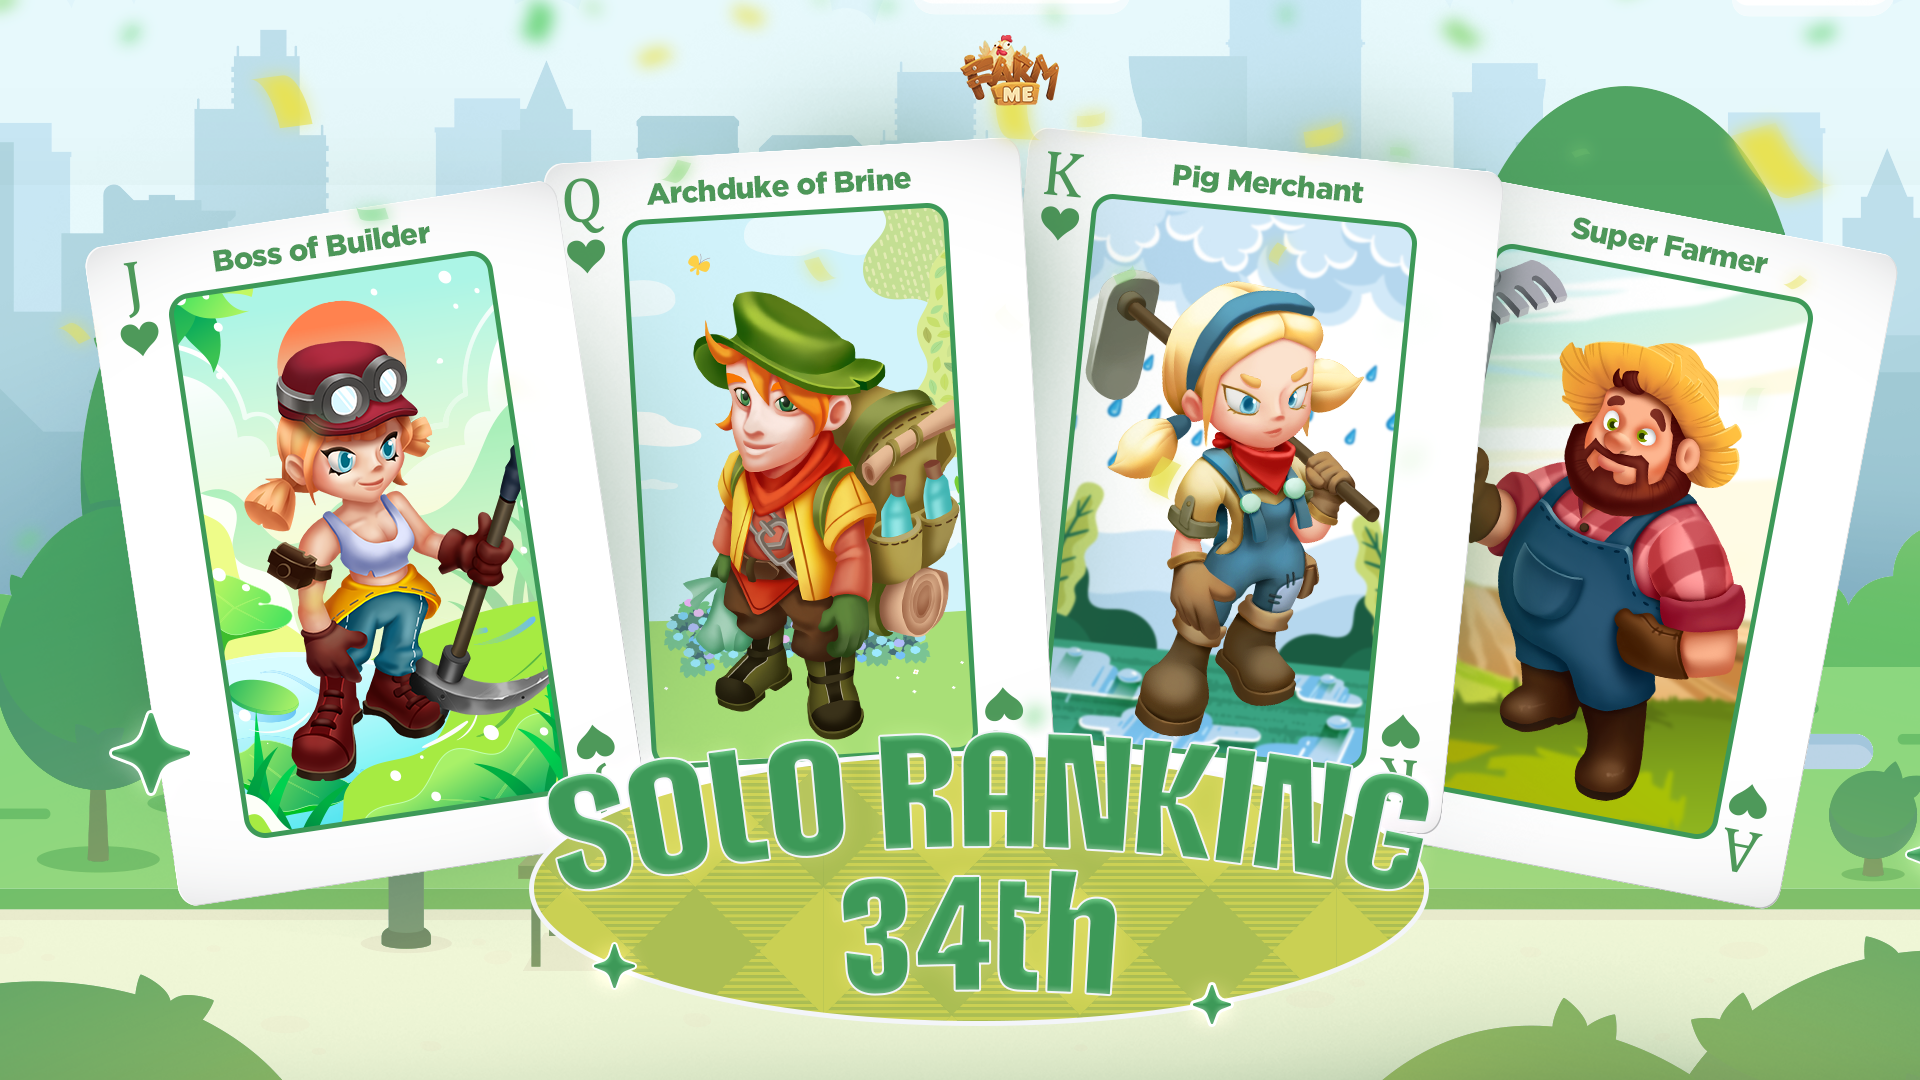 SOLO RANKING - Detailed information of 34th Solo Ranking